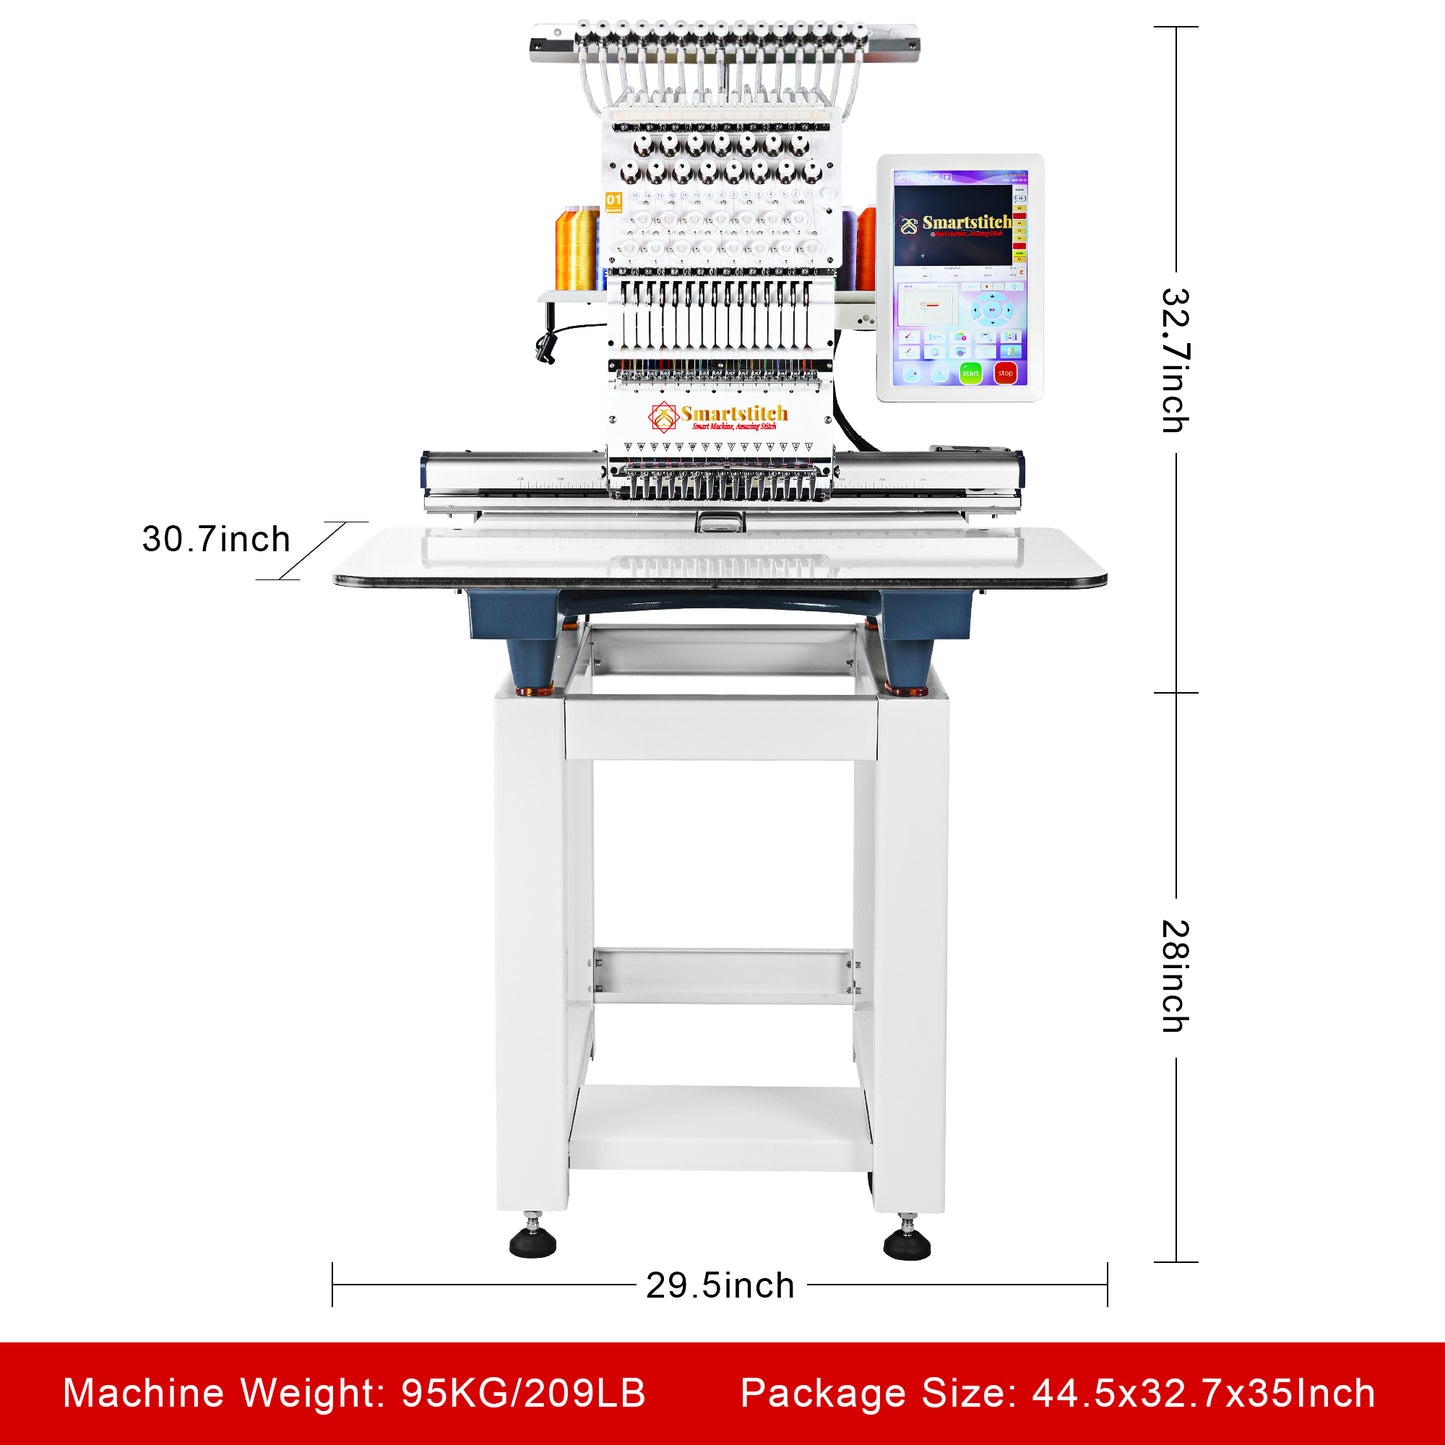 Smartstitch Embroidery Machine S1501, 15  Needles, Max Speed 1200RPM, Commercial Embroidery Machine for Hats and Clothing with 13.8"x19.7" Embroidery Area